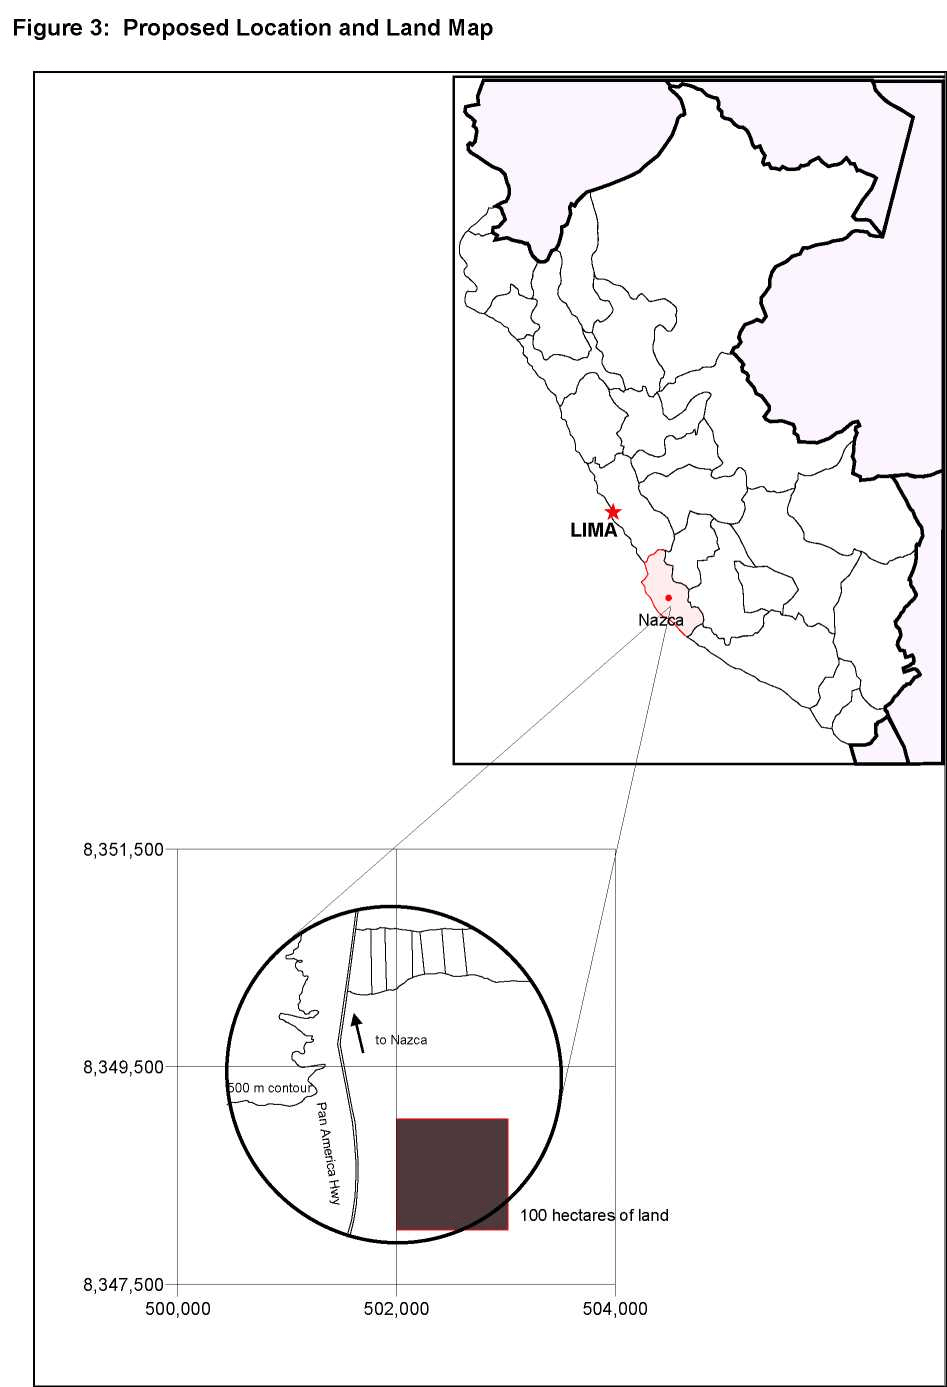 Proposed Location and Land Map